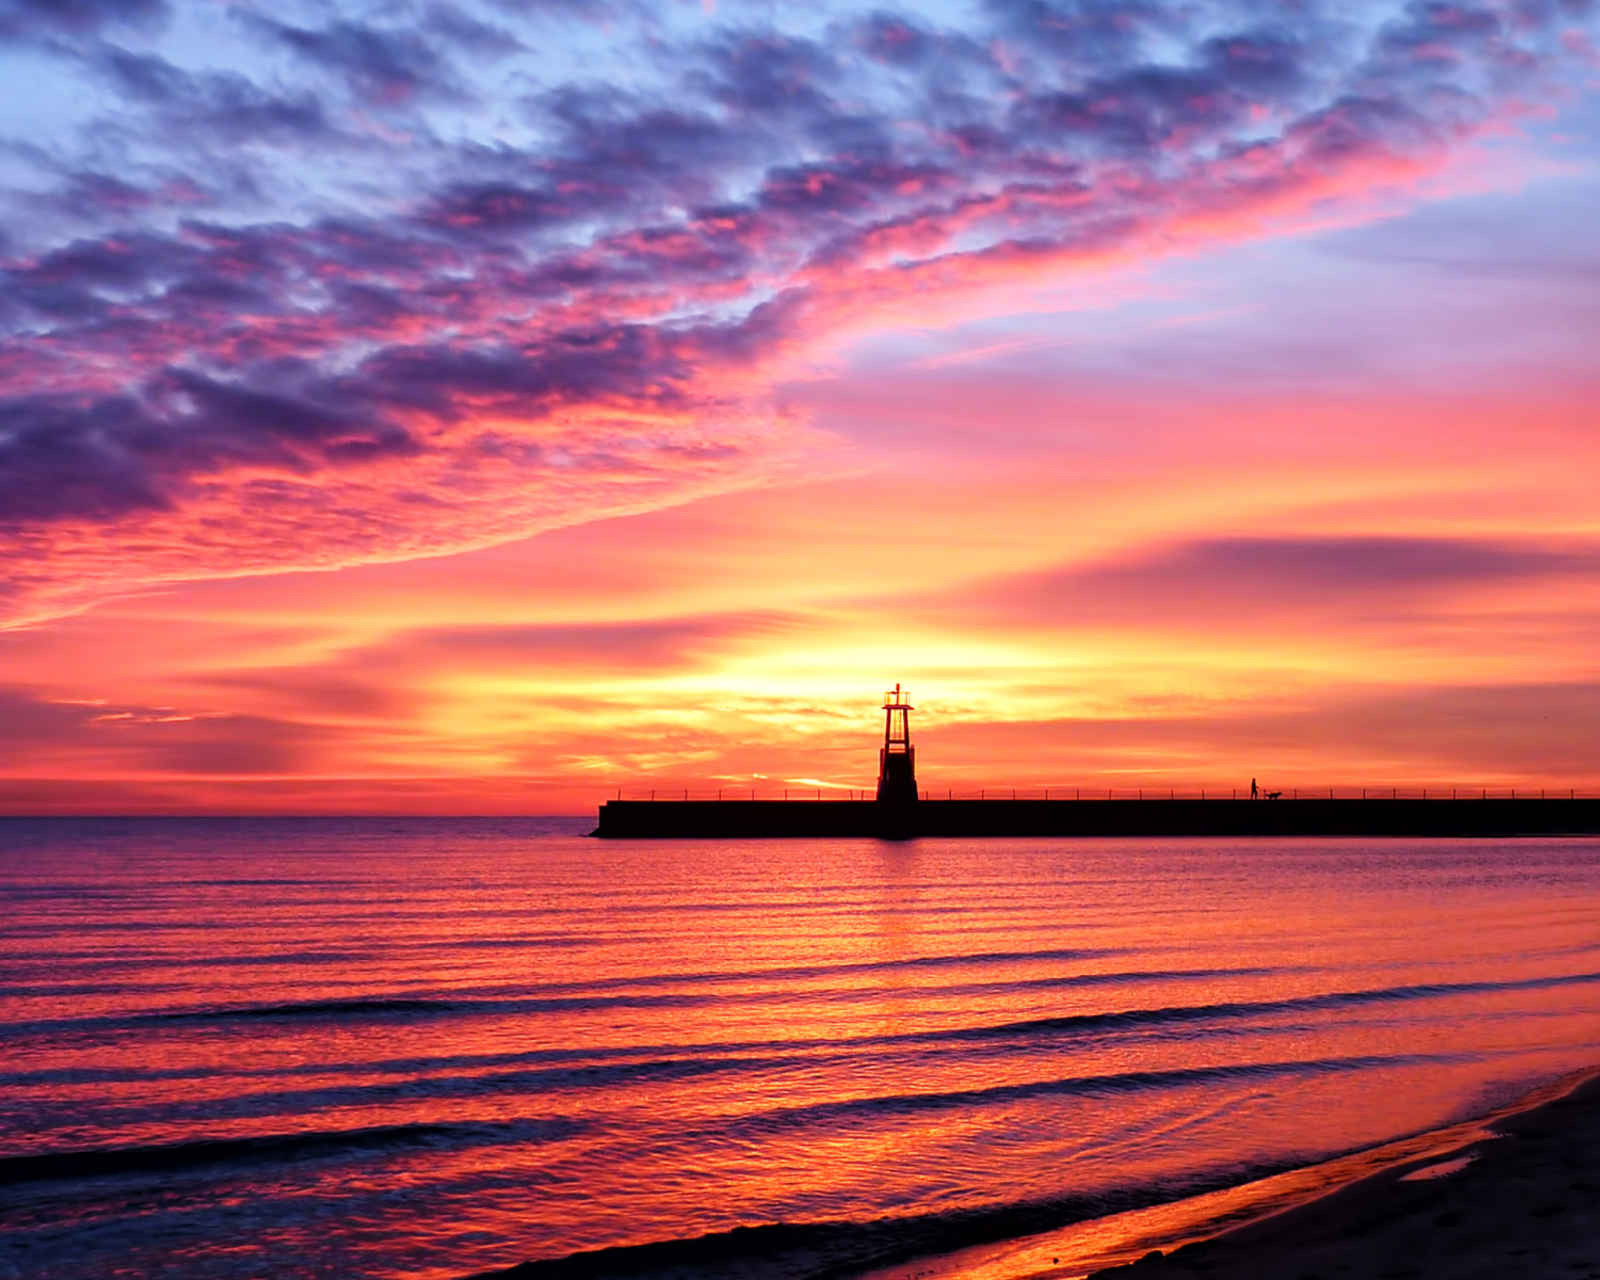 Lighthouse And Red Sunset Beach wallpaper 1600x1280